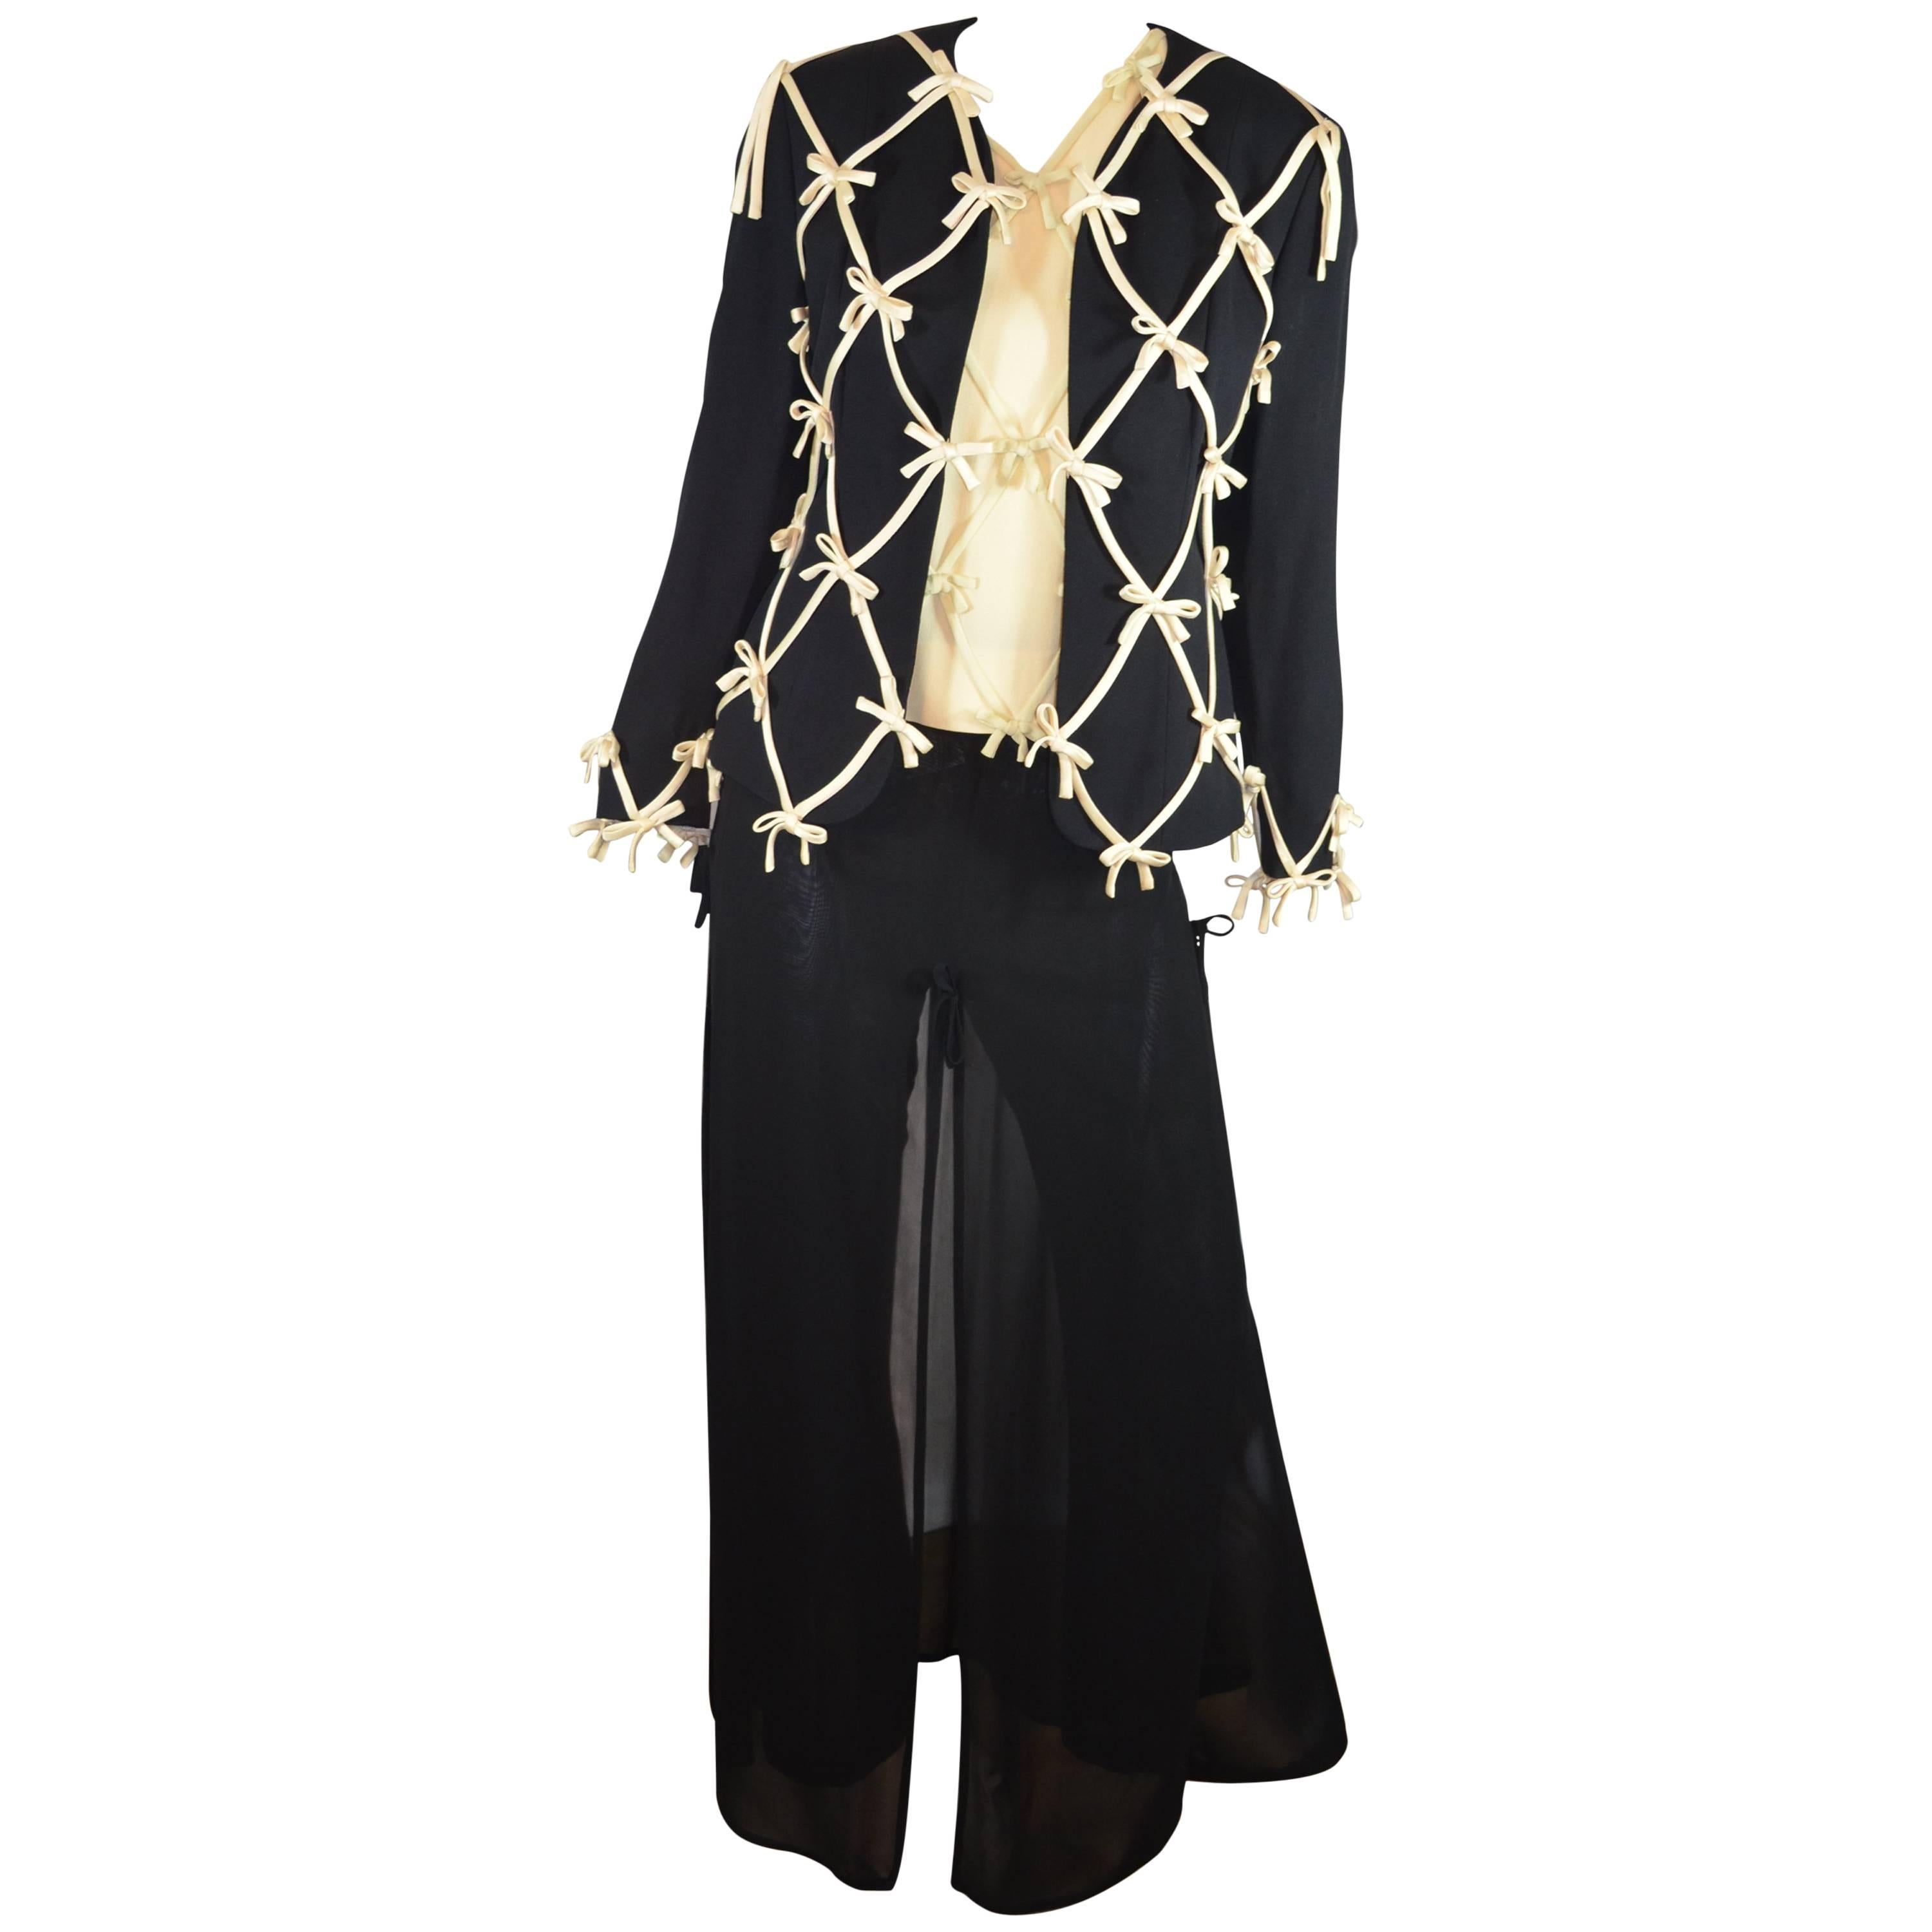 Moschino Cheap and Chic Bow Embellished Pants Suit